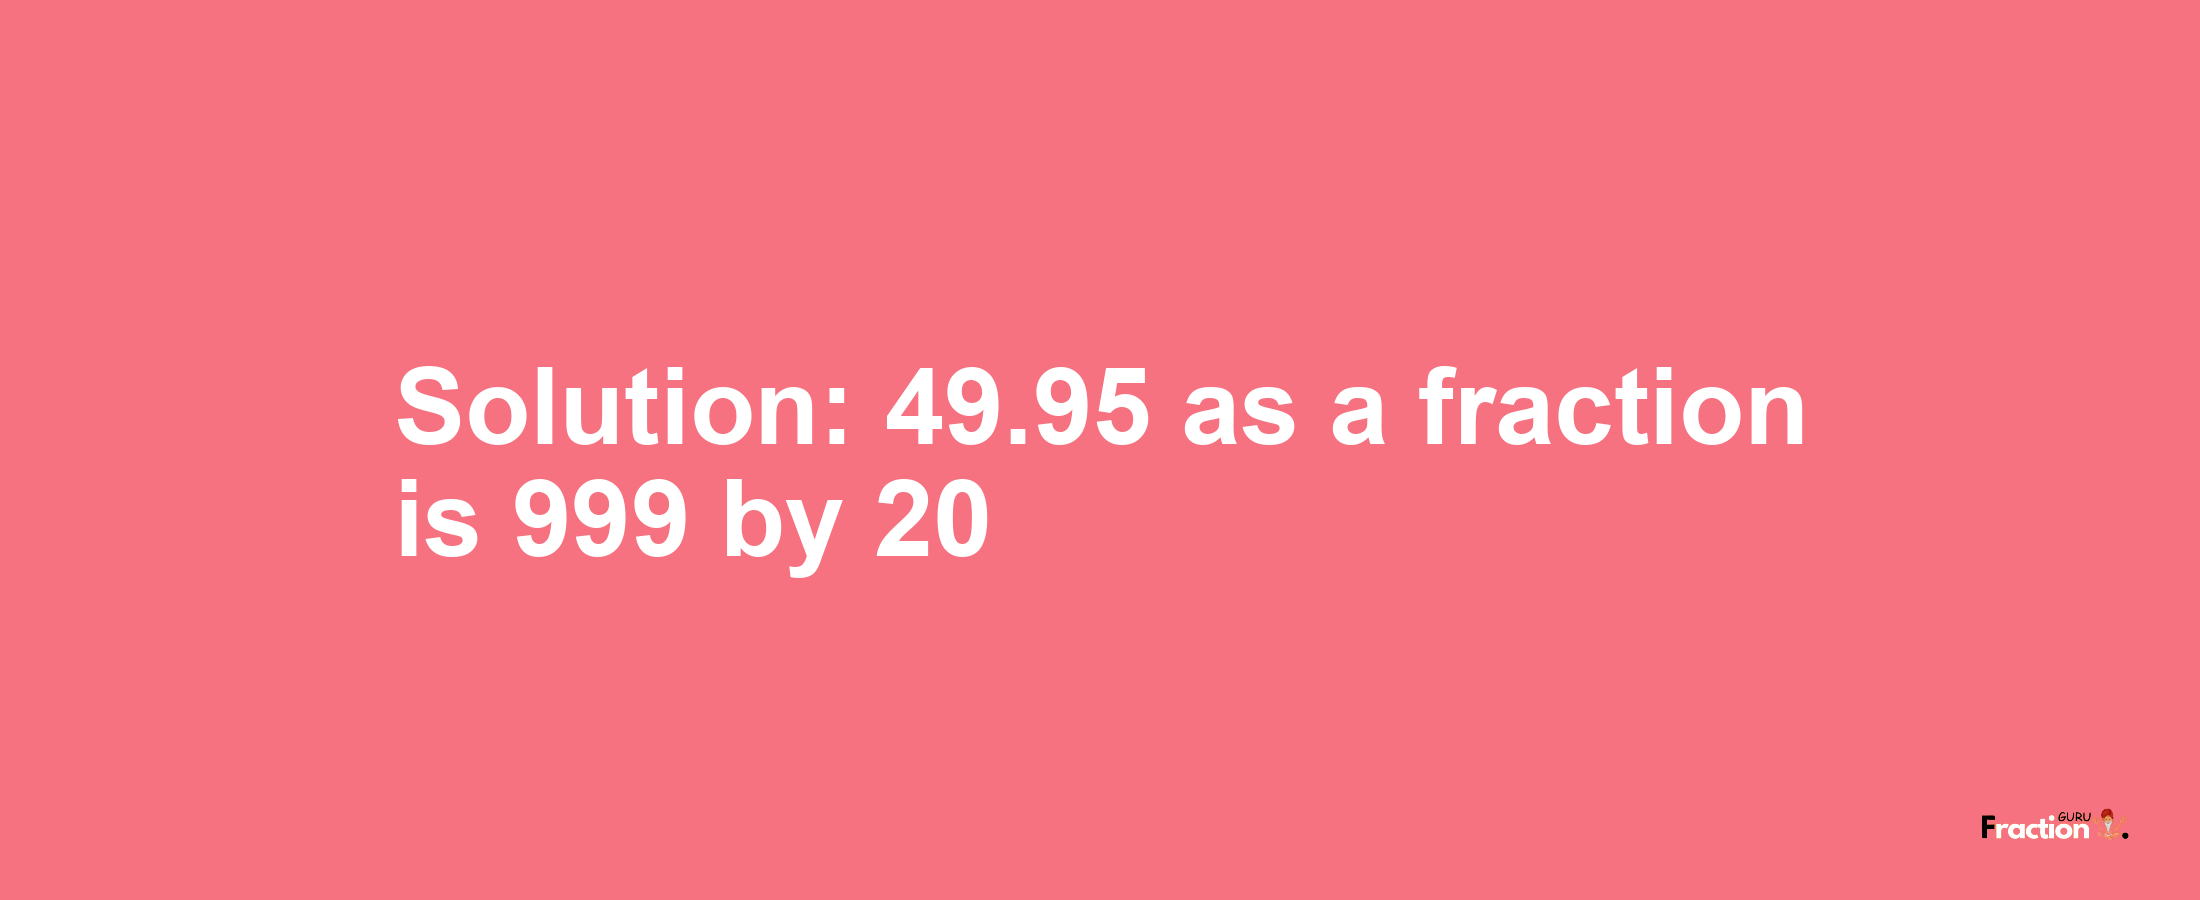 Solution:49.95 as a fraction is 999/20